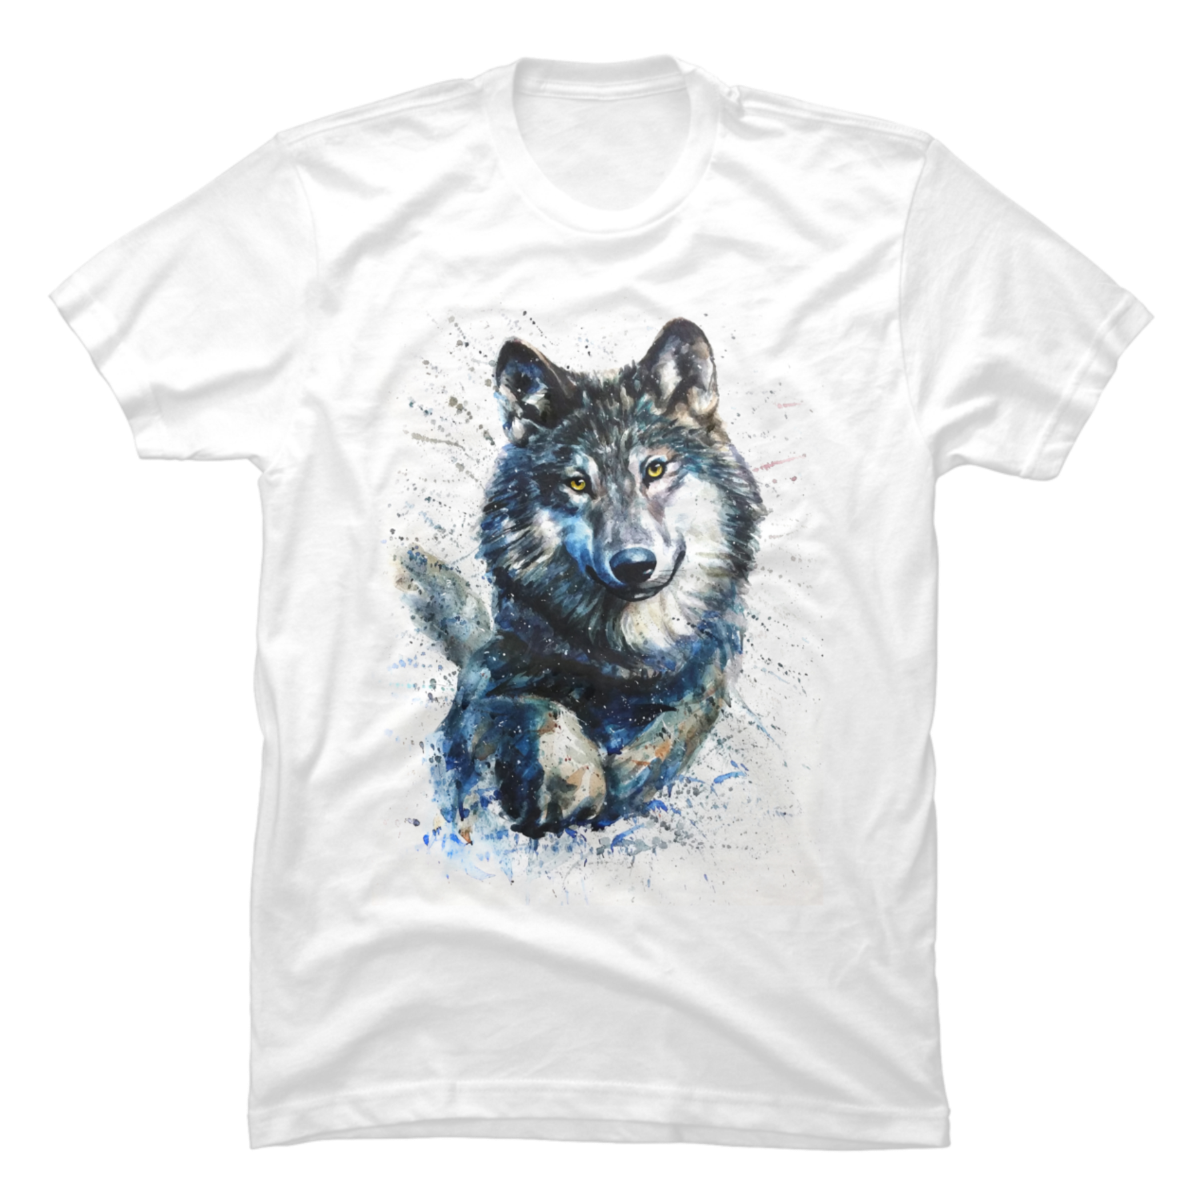 Wolf watercolor painting,wolf tshirt - Buy t-shirt designs